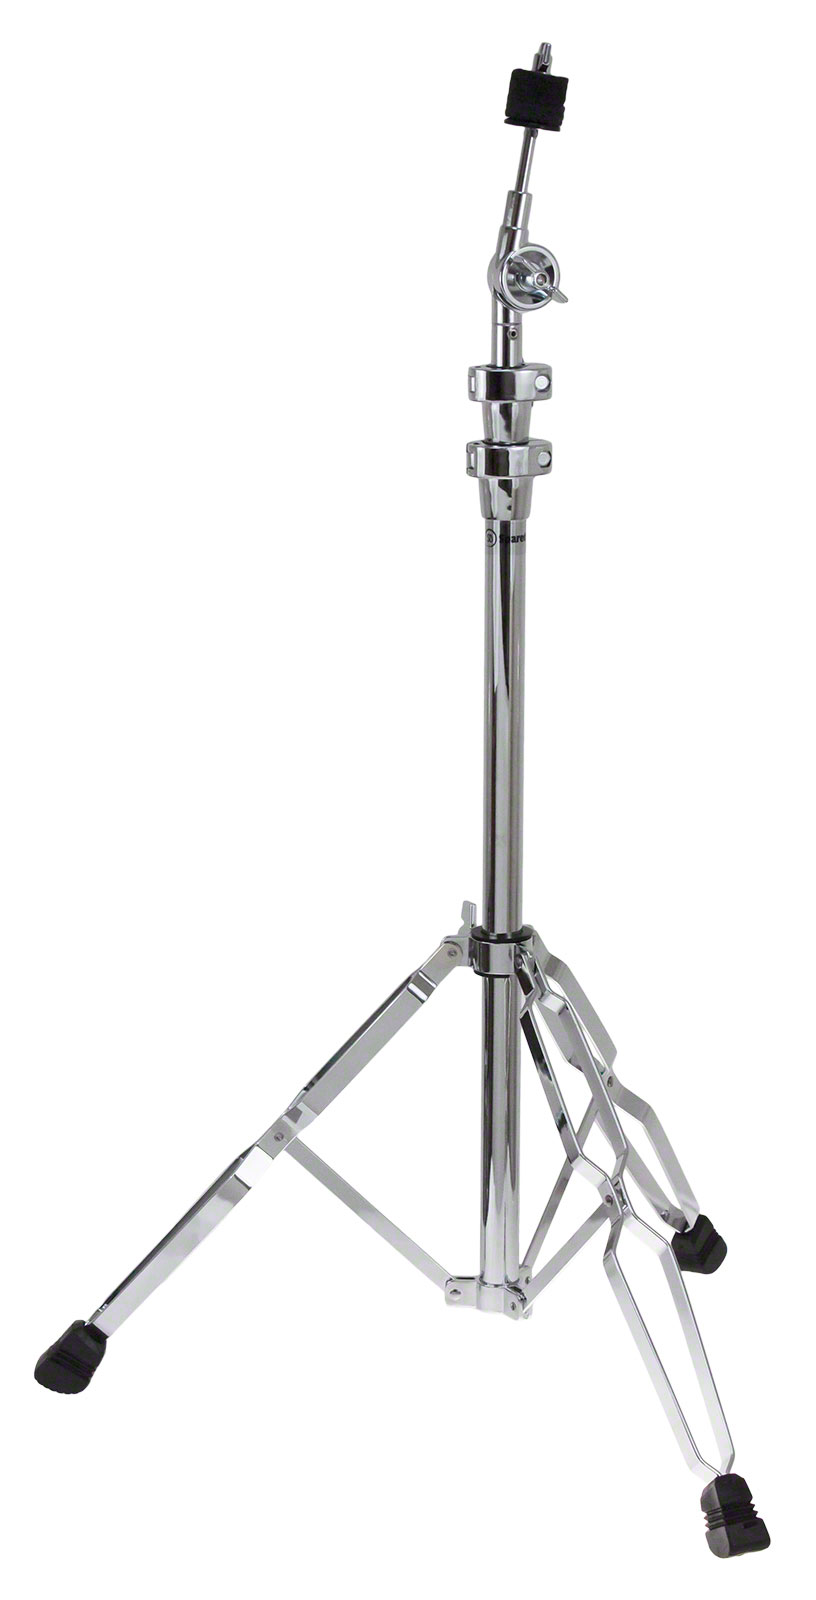 SPAREDRUM HCS1 - CYMBAL STAND STRAIGHT DOUBLE-BRACED LEGS